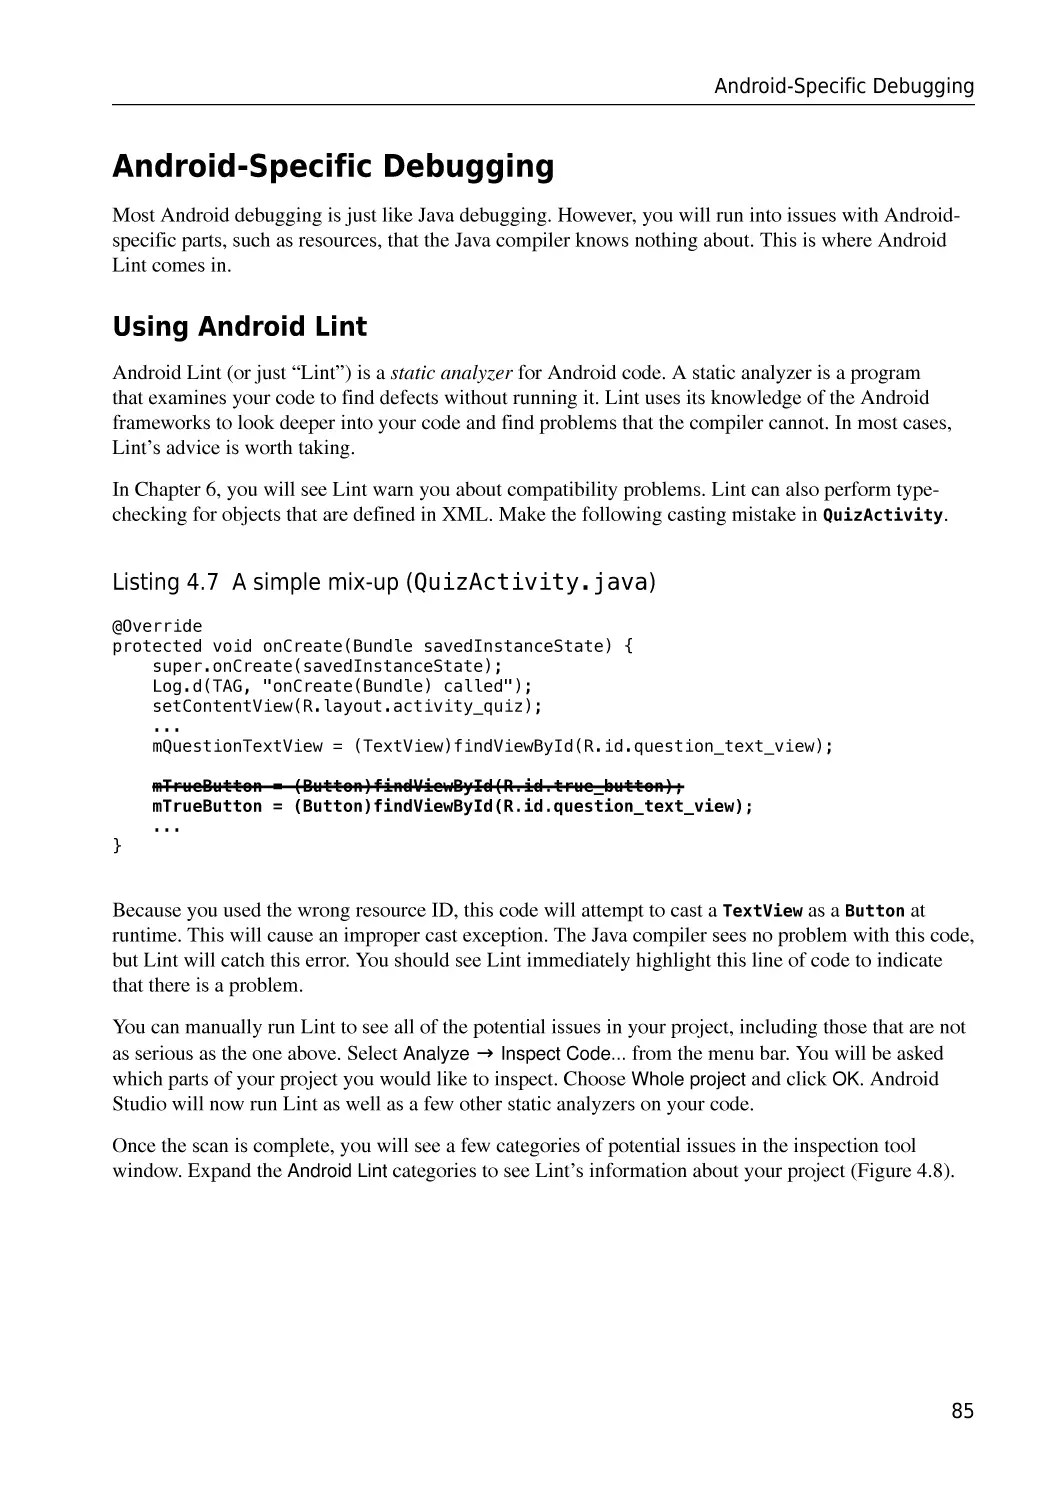 Android-Specific Debugging
Using Android Lint